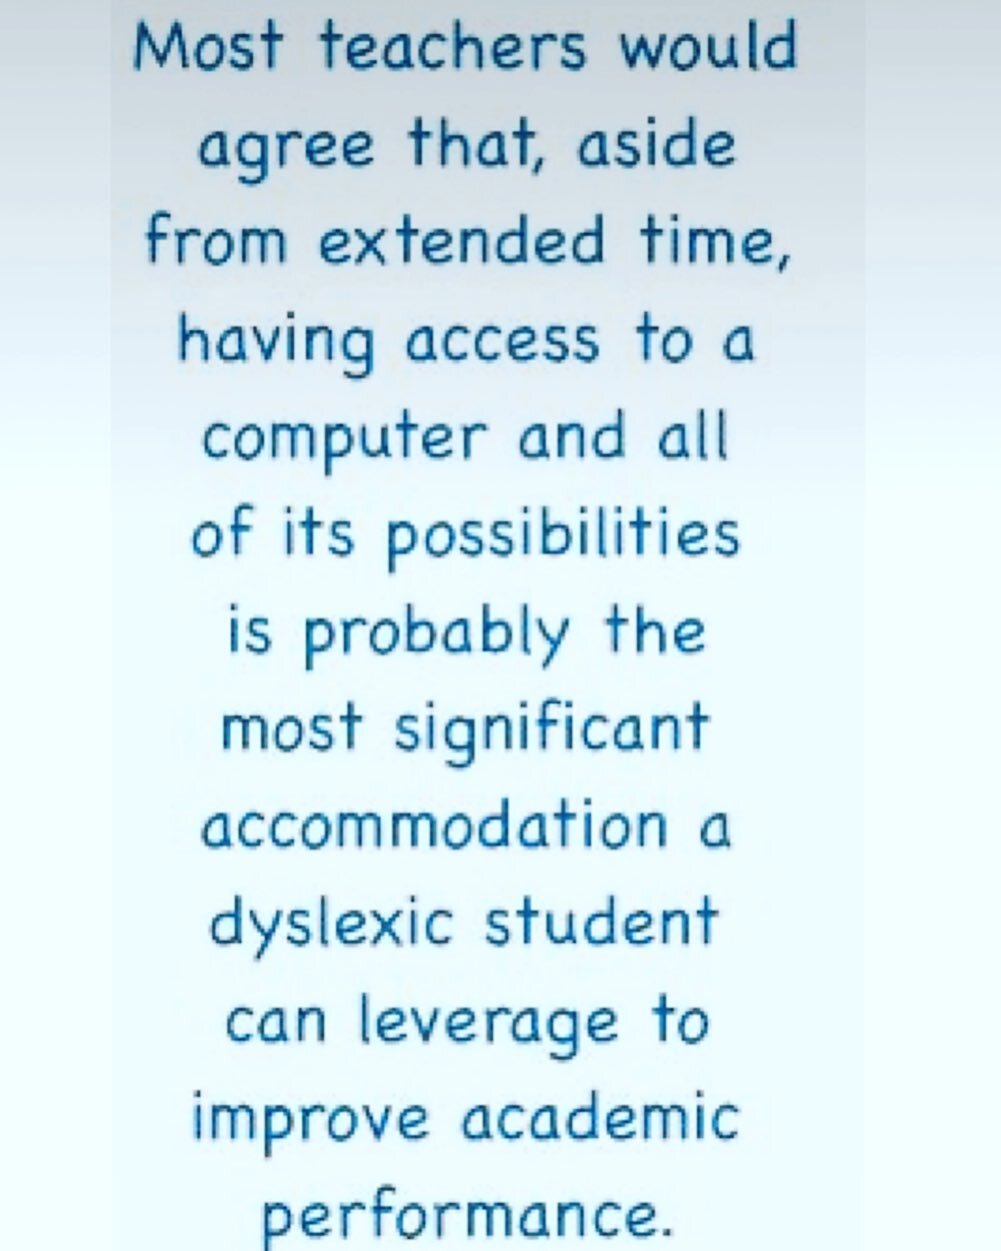 These are wise words from the Yale Center for Dyslexia and Creativity. Link in bio for more! #assistivetechnology #dyslexiasupport #leveltheplayingfield #technolgyisyourfriend #dyslexiateacher #dyslexiafriendly